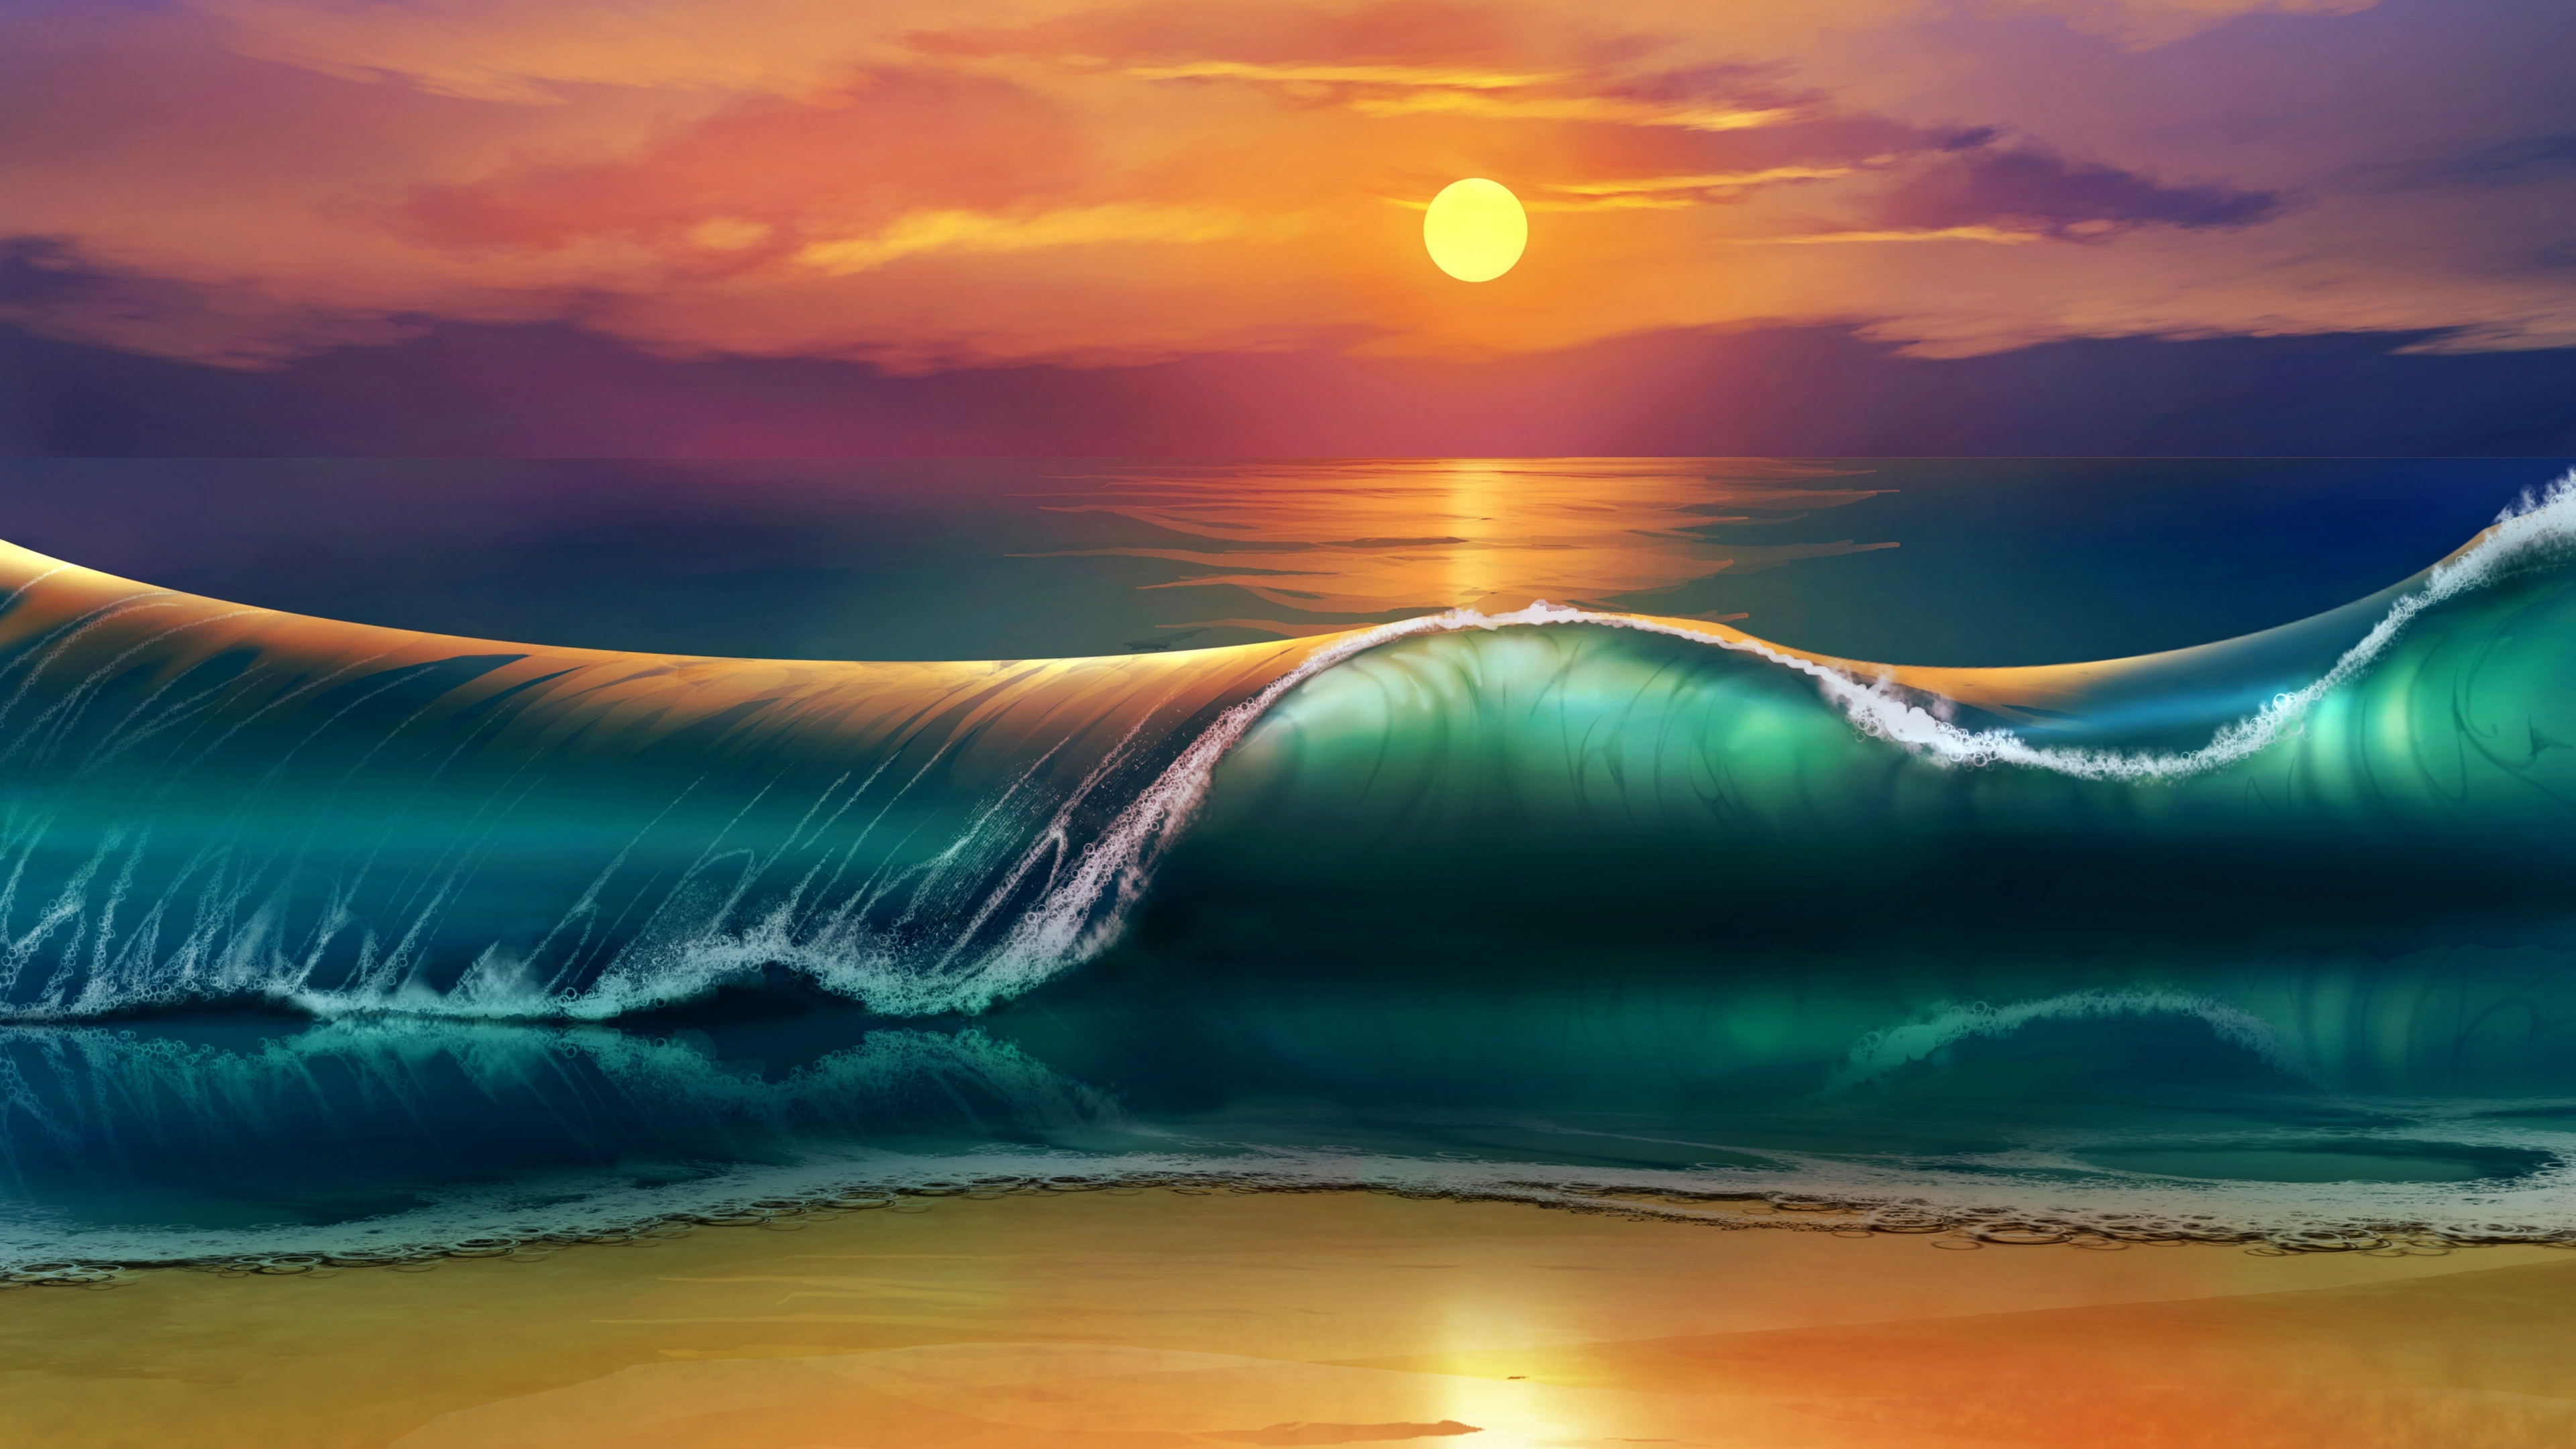 The Sunset Art, HD Artist, 4k Wallpapers, Images, Backgrounds ...